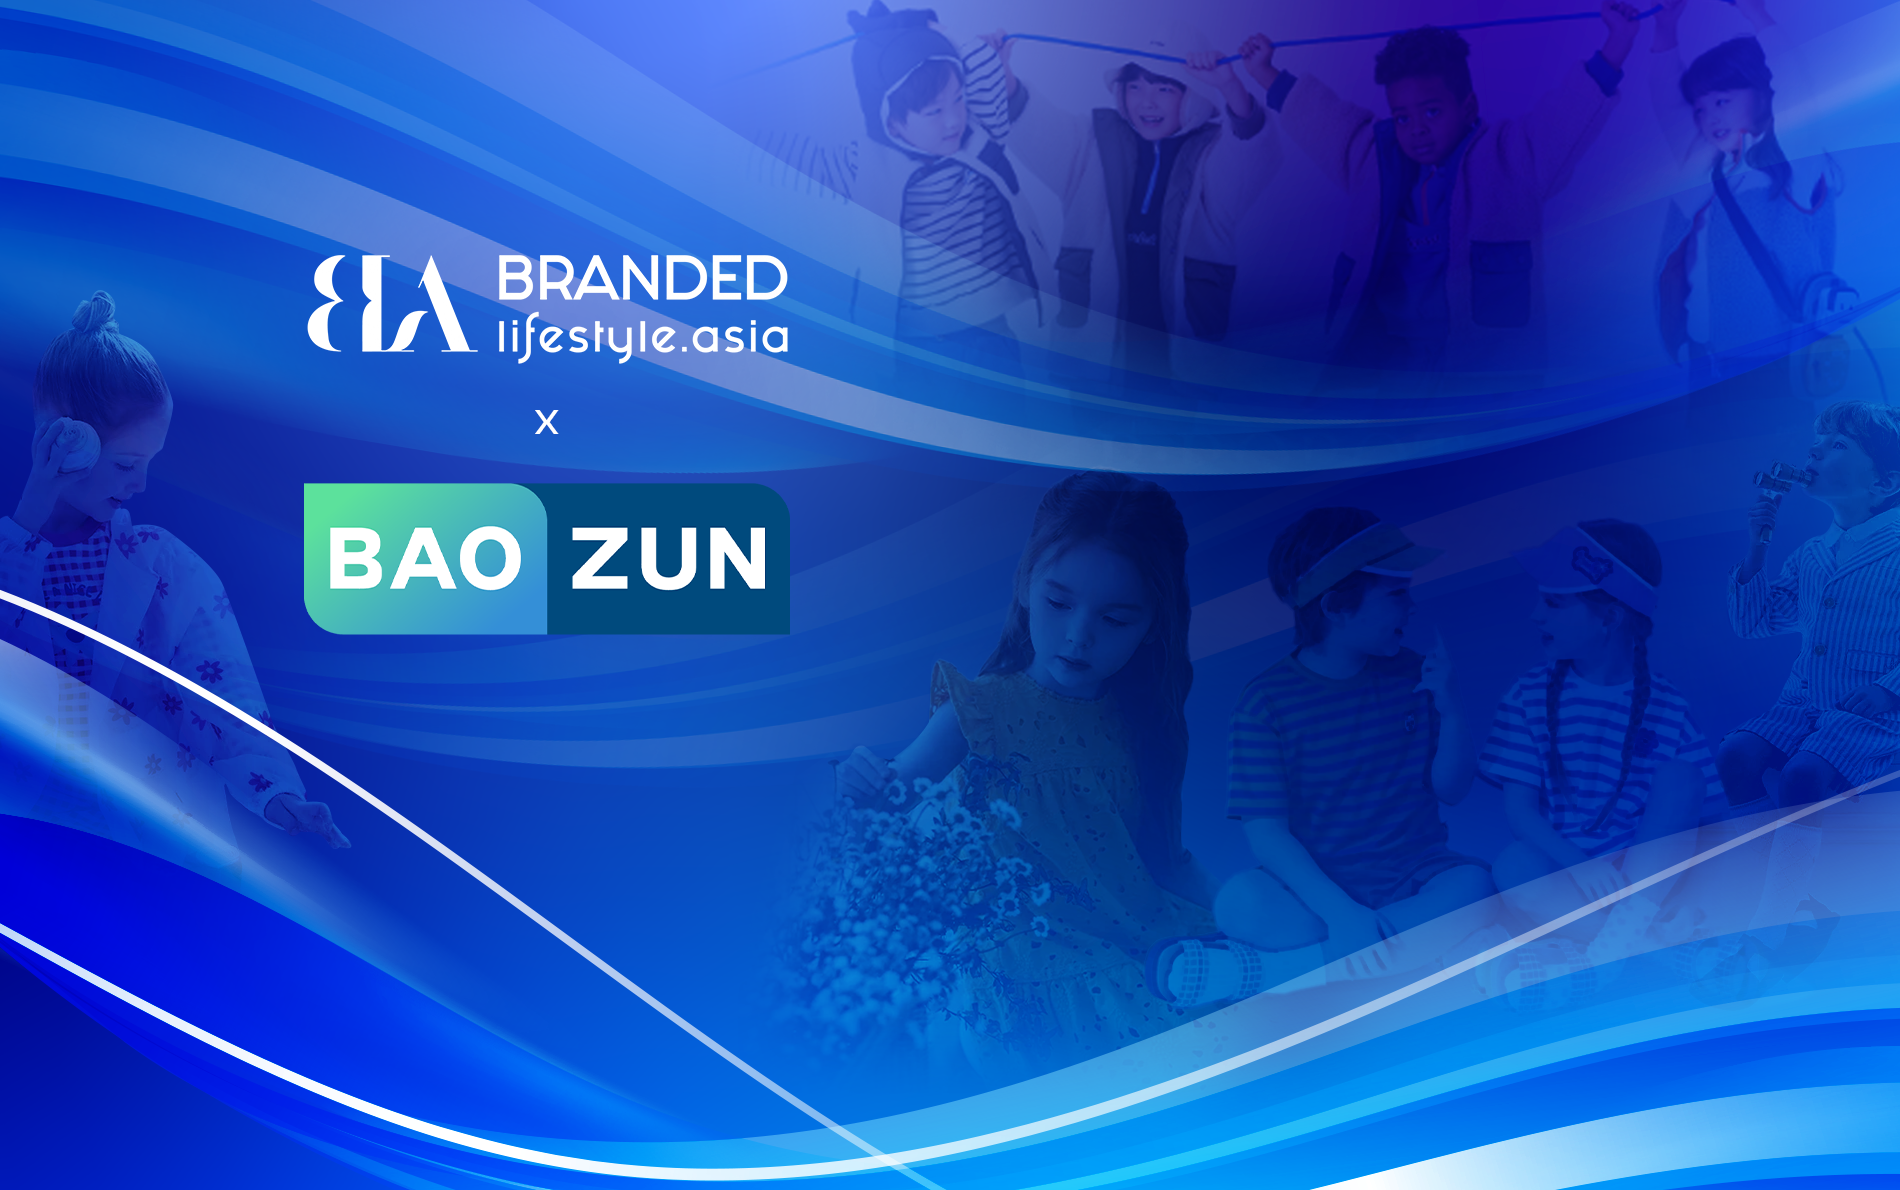 Baozun Asia Strategic Partnership with Branded Lifestyle Asia to Expand Technology and eCommerce Capabilities in Southeast Asia